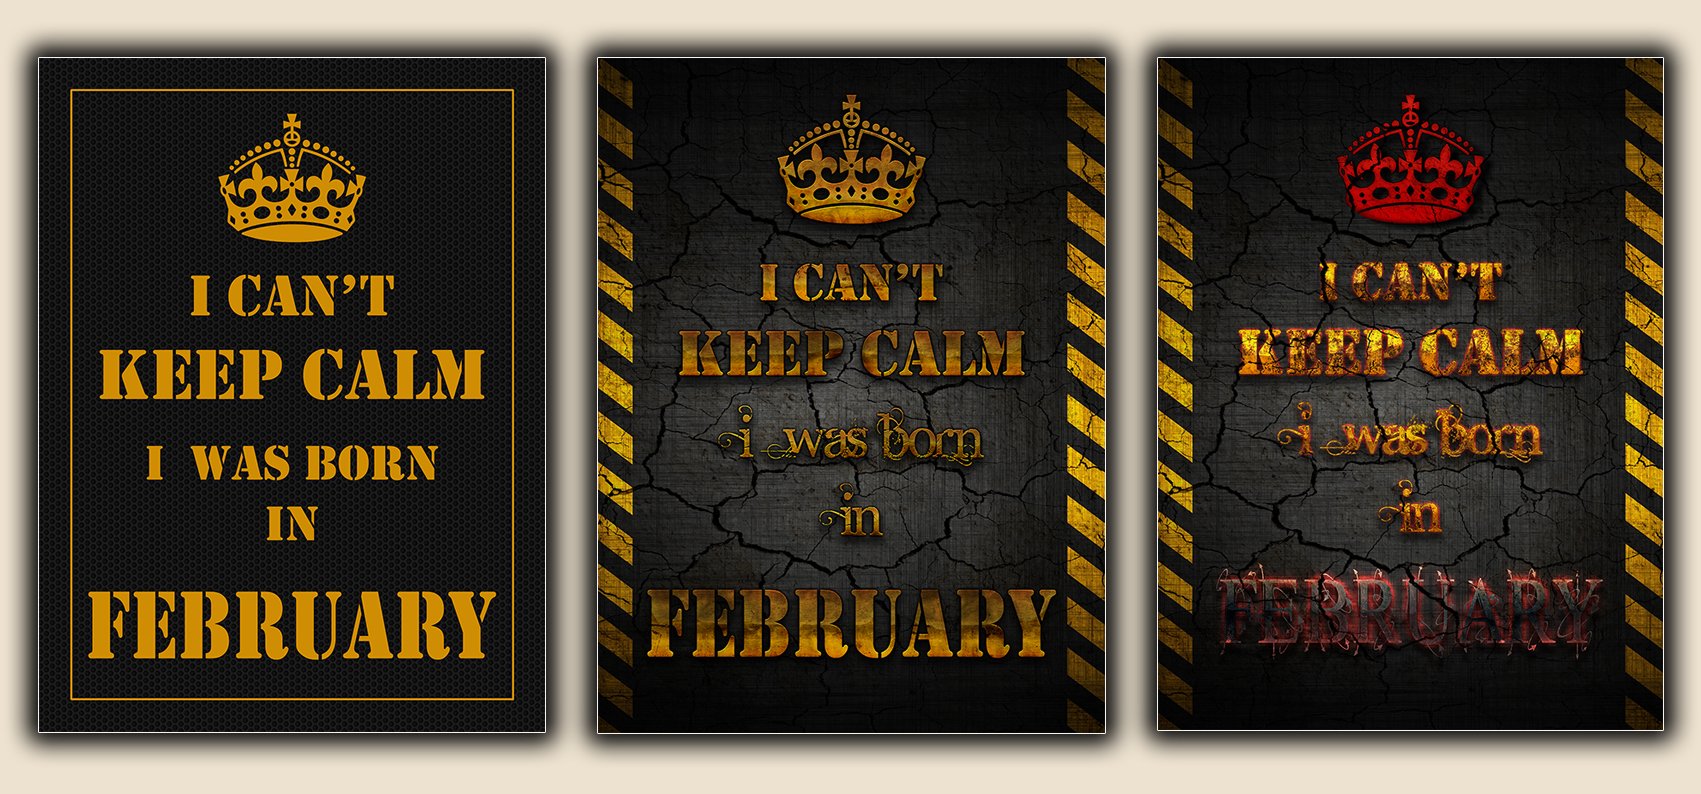 I Can't Keep Calm - I was Born in February